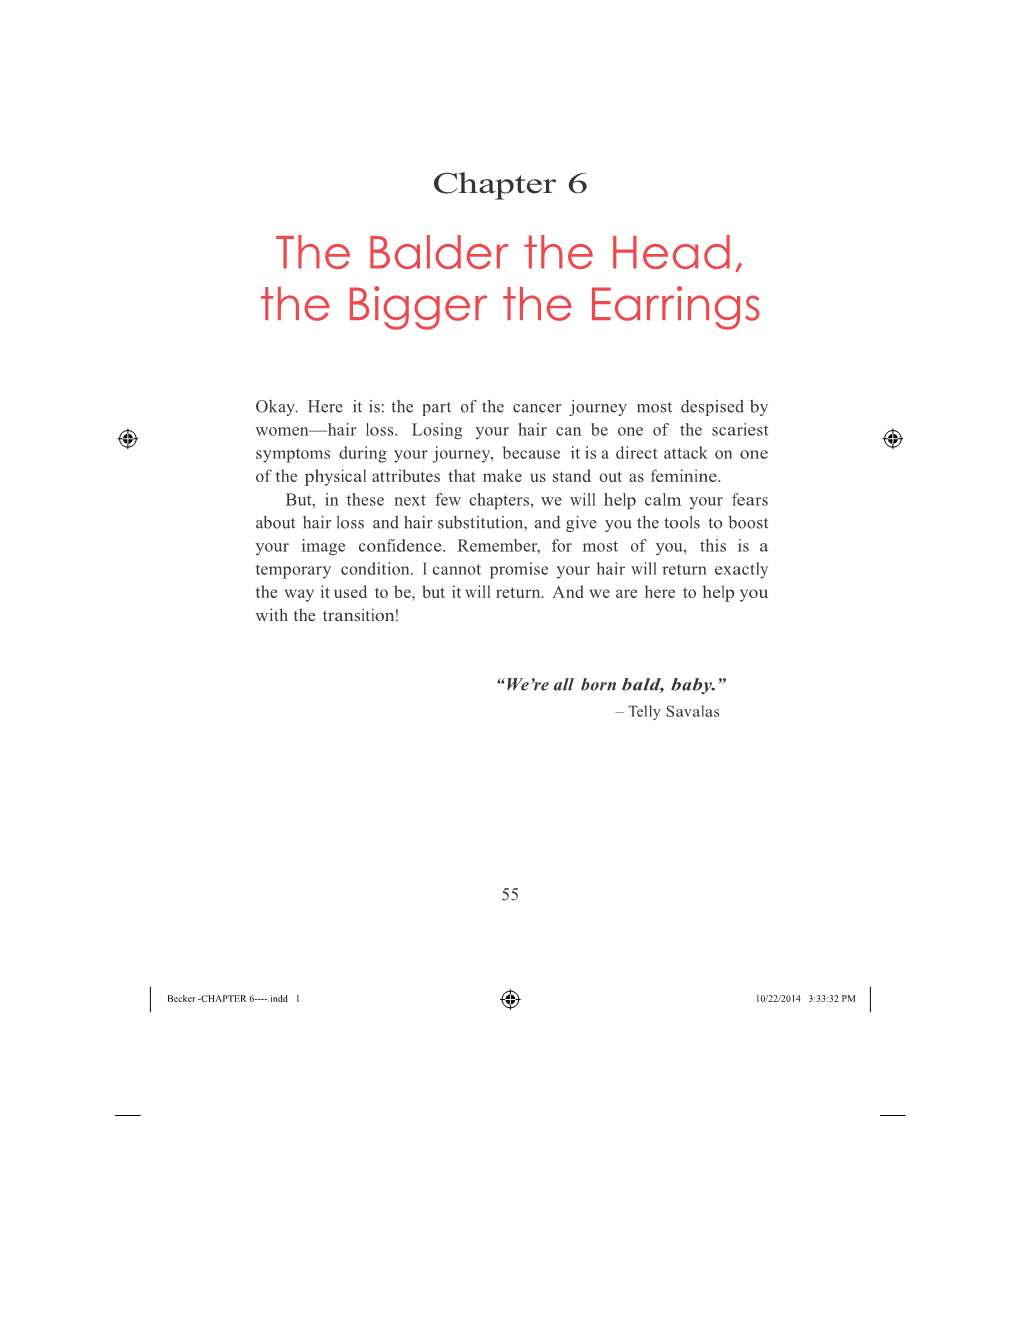 The Balder the Head, the Bigger the Earrings